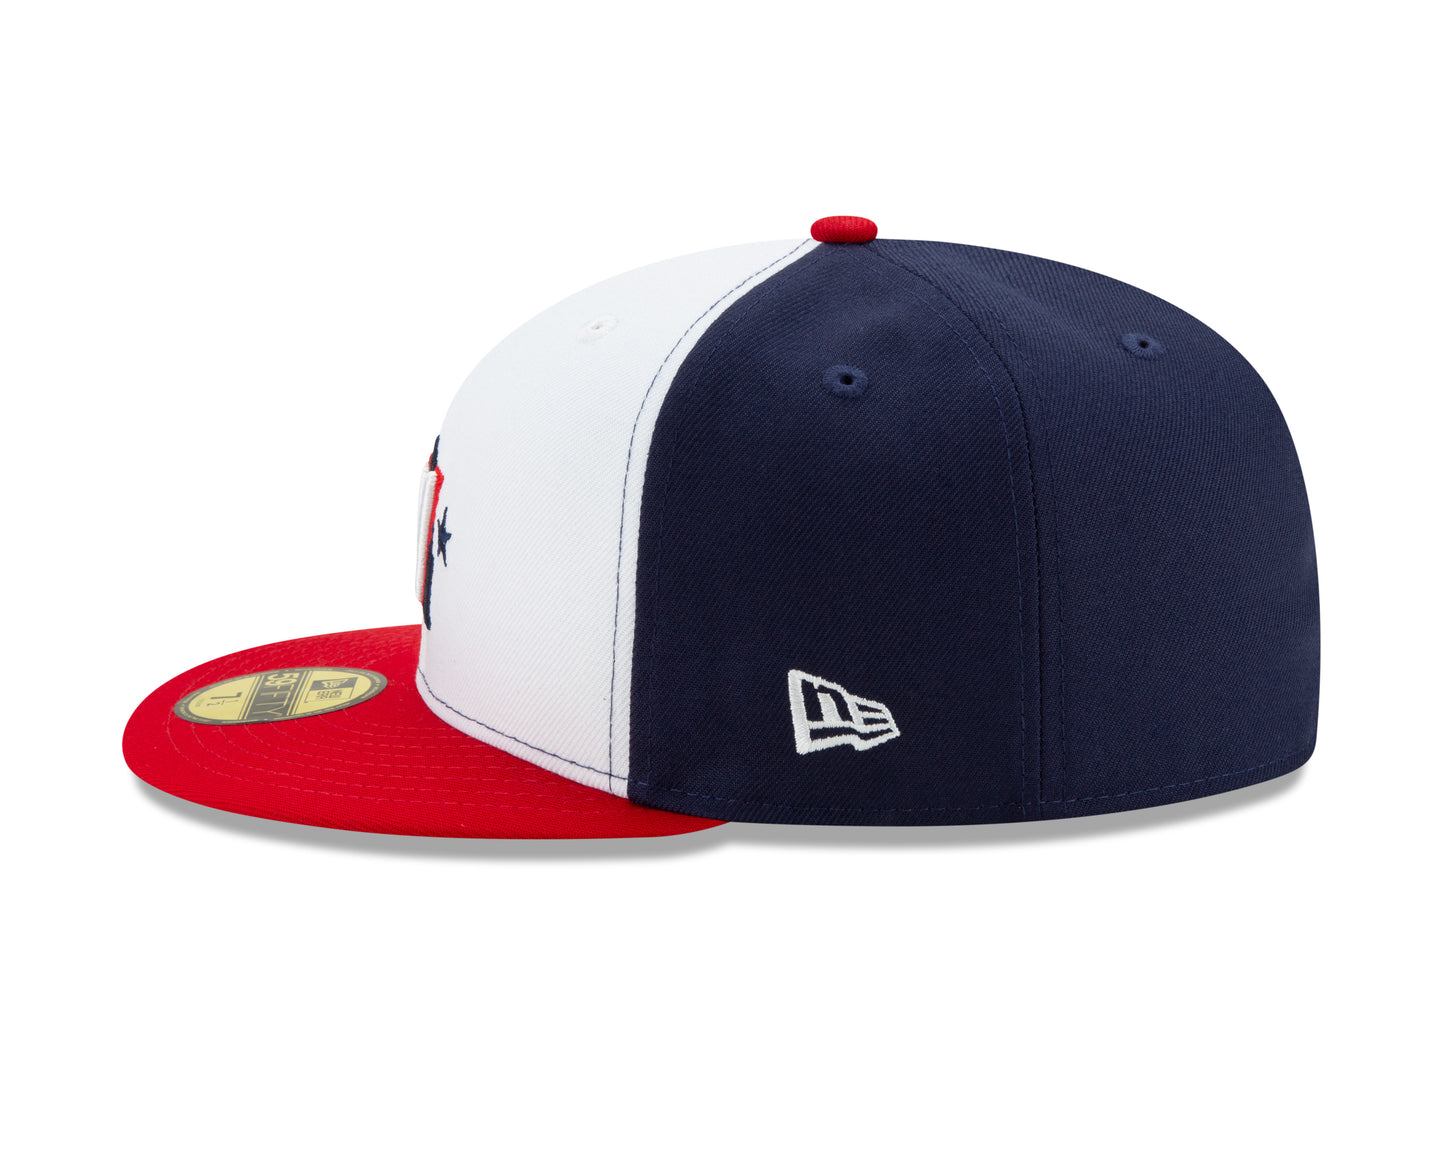 Washington Nationals New Era Authentic Collection Performance 59FIFTY Hat